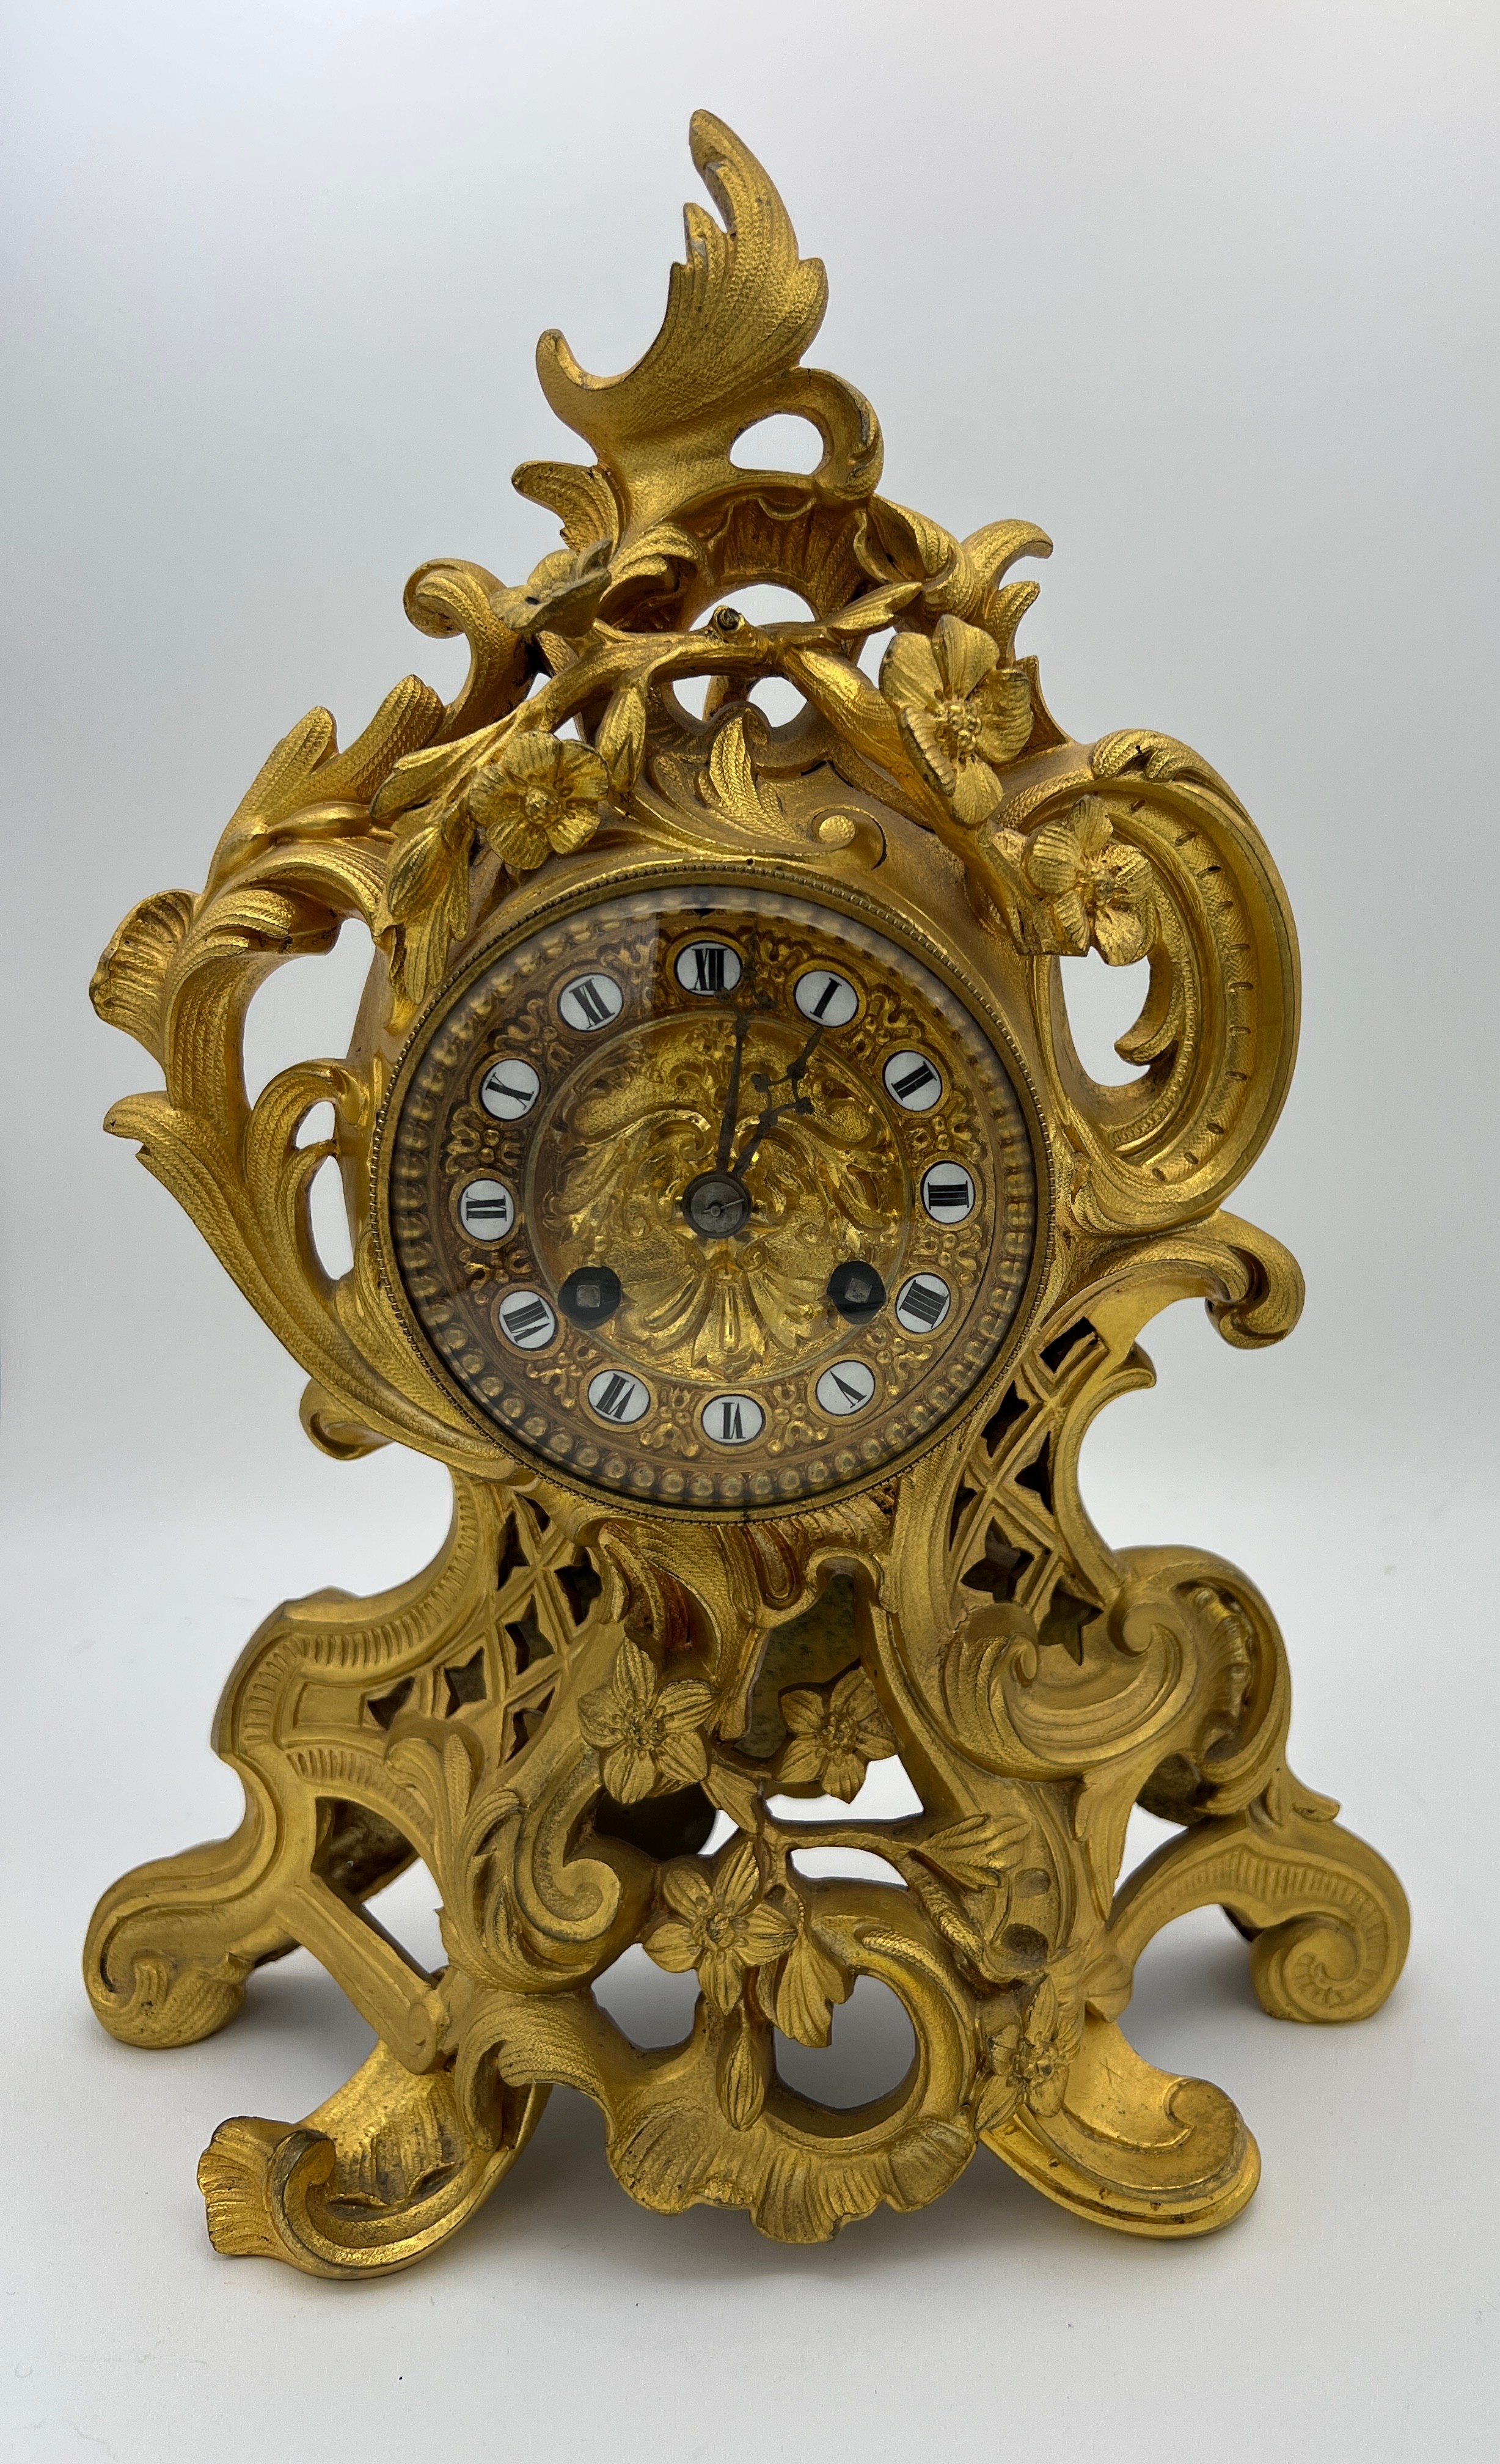 A French gilt bronze mantel clock signed Chaudé Hger du Roi. Stamped Lons Brevette. Strikes on the